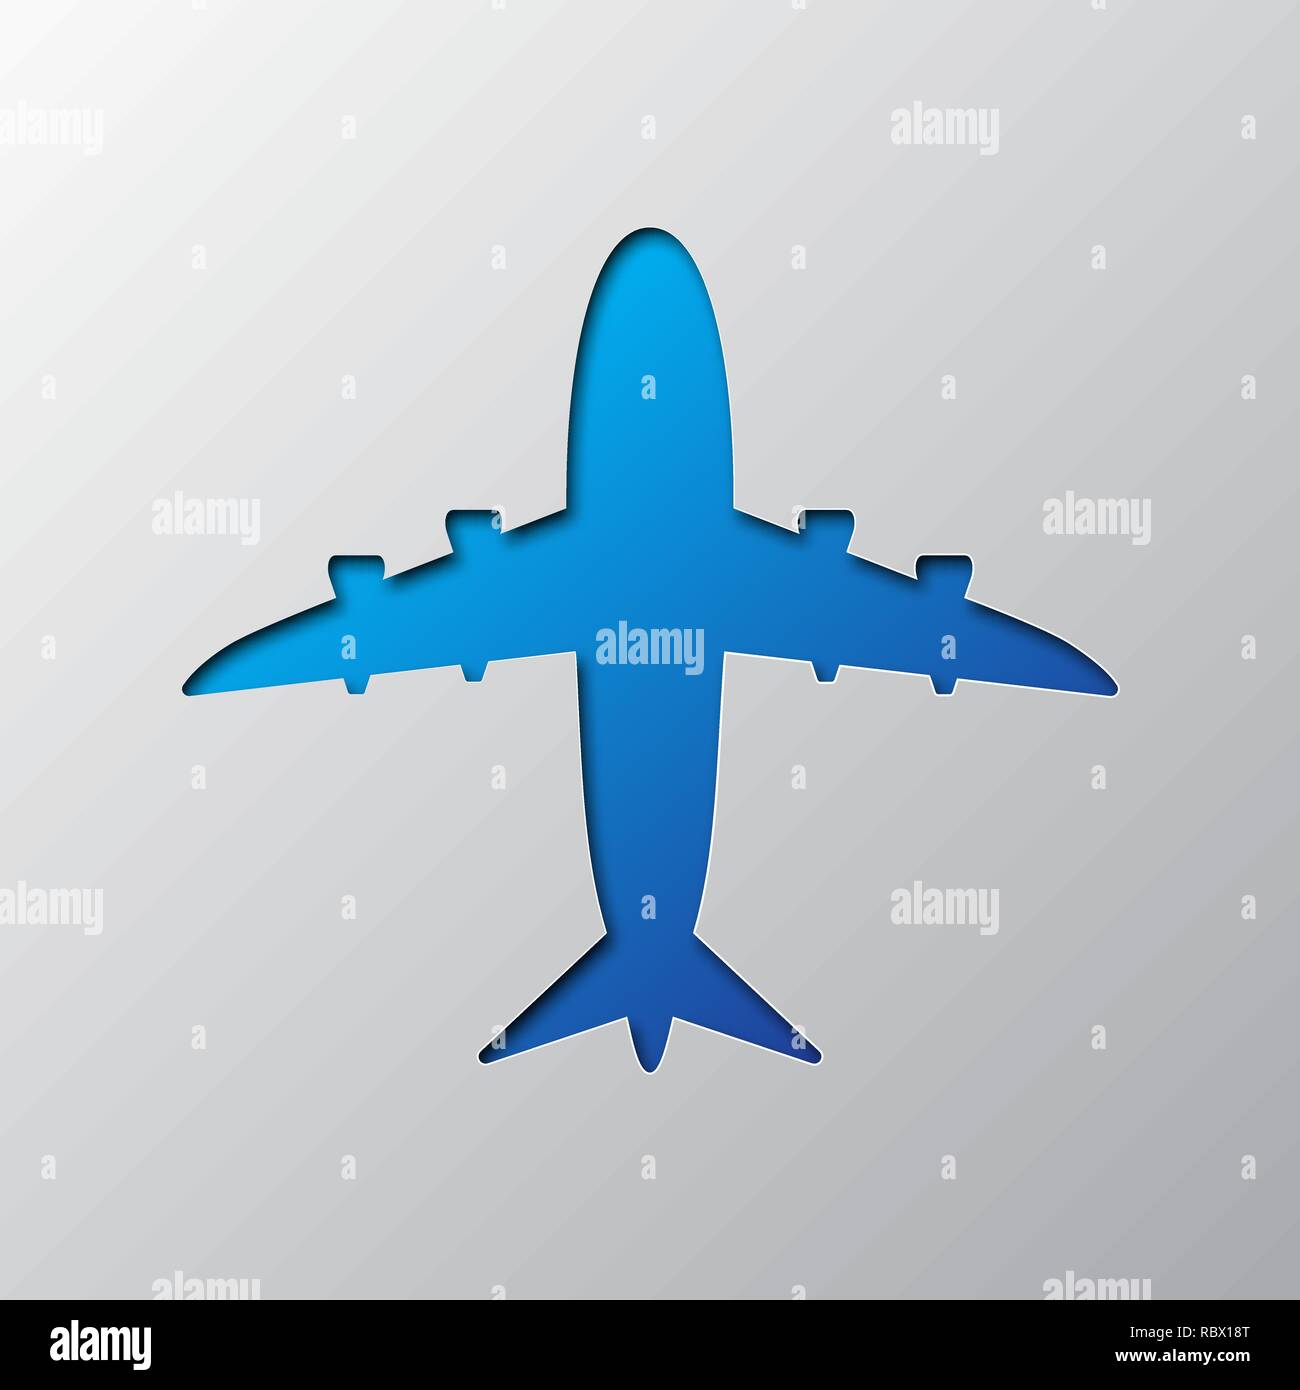 Aircraft Stock Vector Images - Alamy